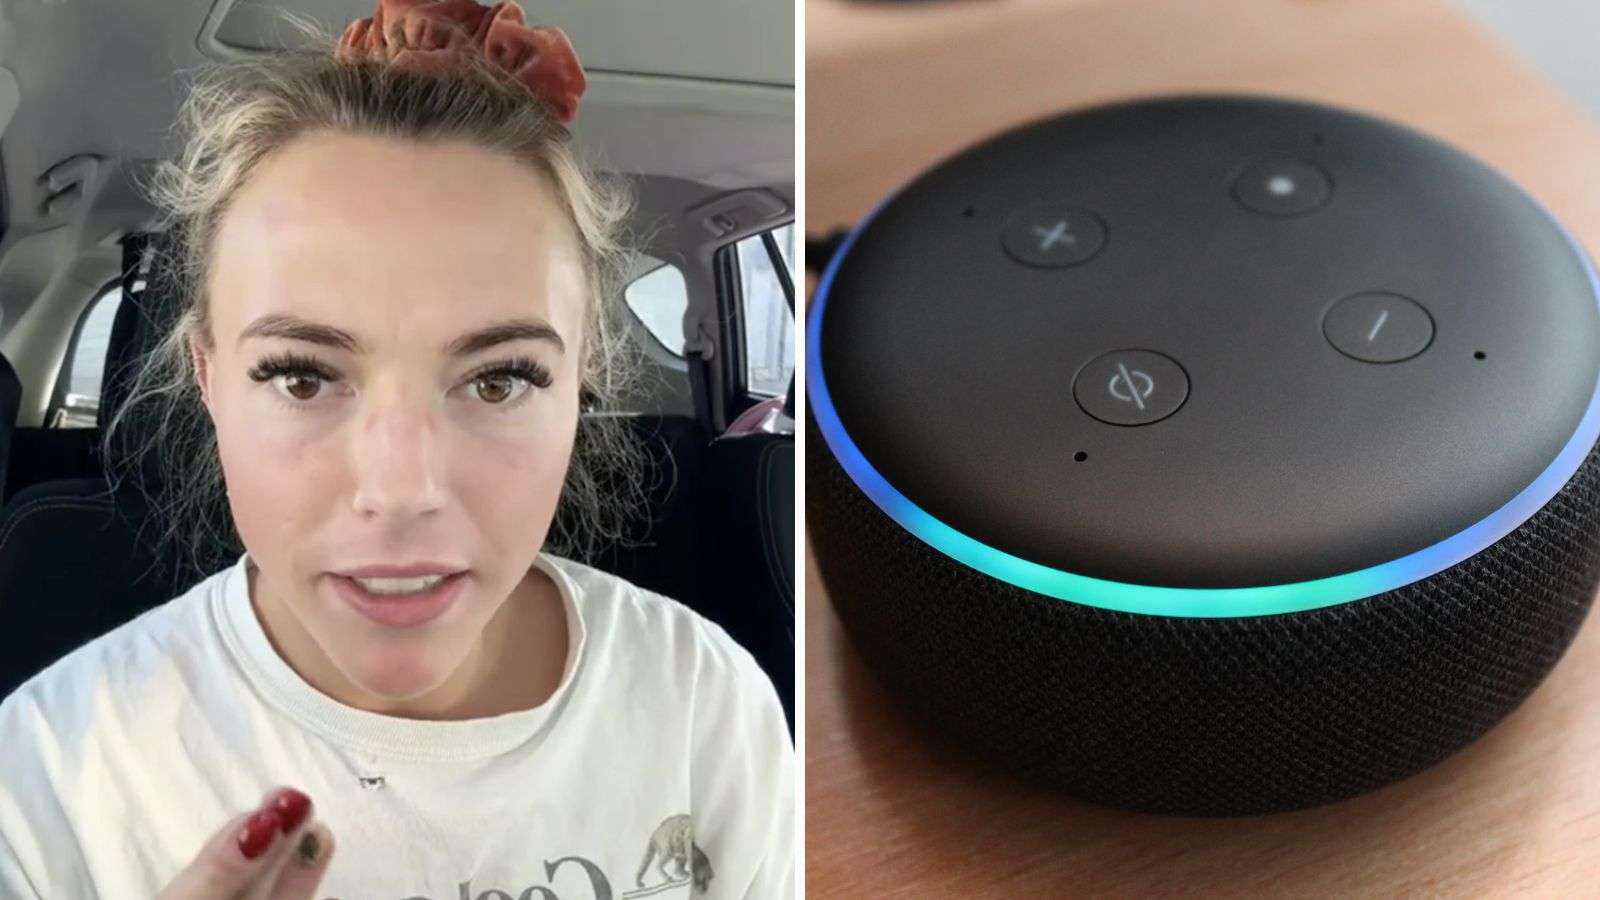 Woman throws out Amazon Alexa after it kept speaking to her husband